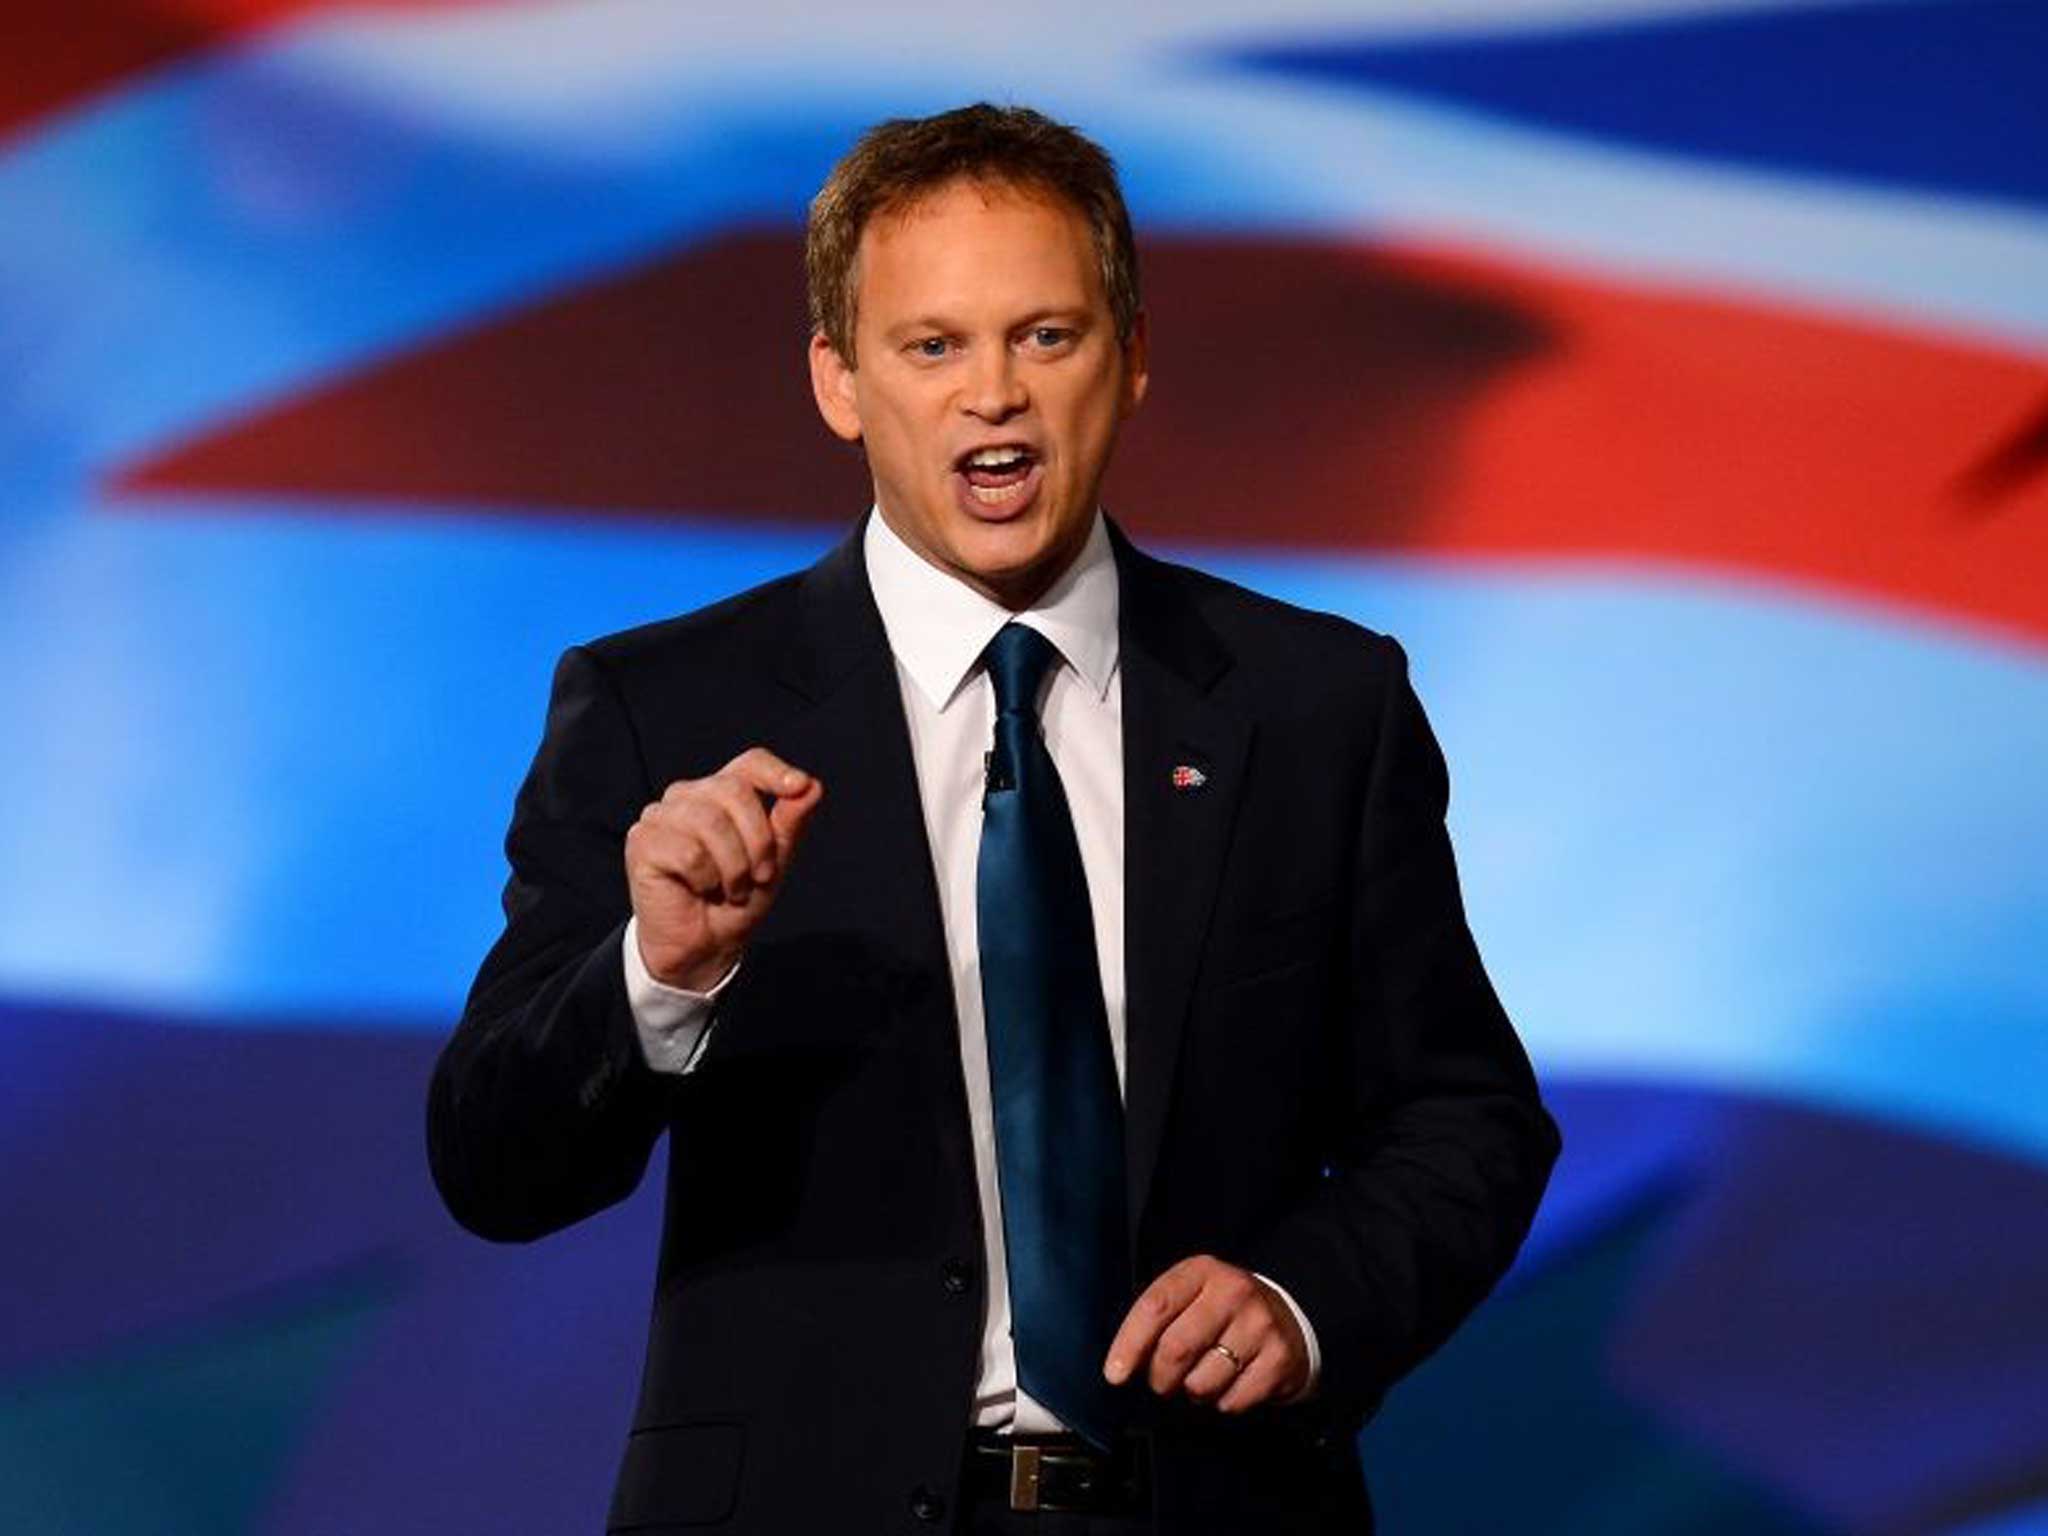 Tory party chairman Grant Shapps